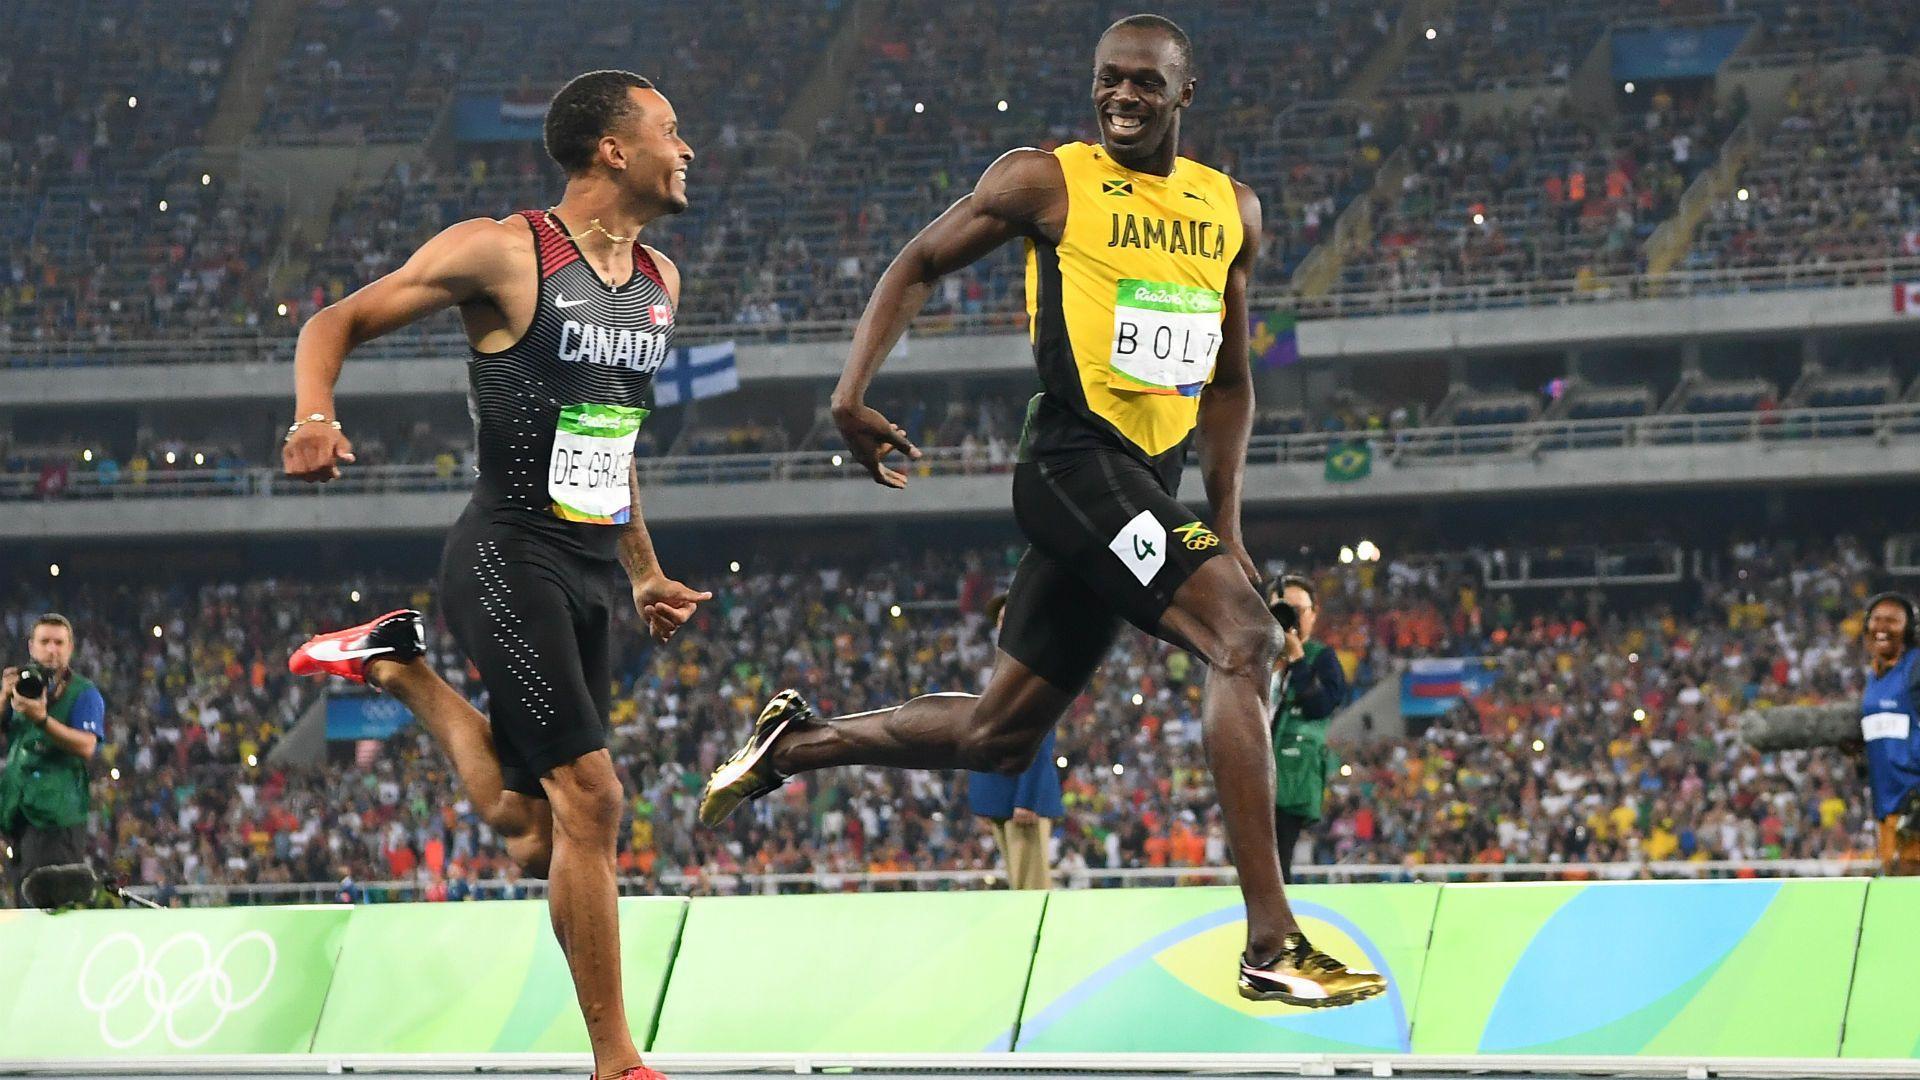 Usain Bolt will likely pass stardom baton to Andre de Grasse